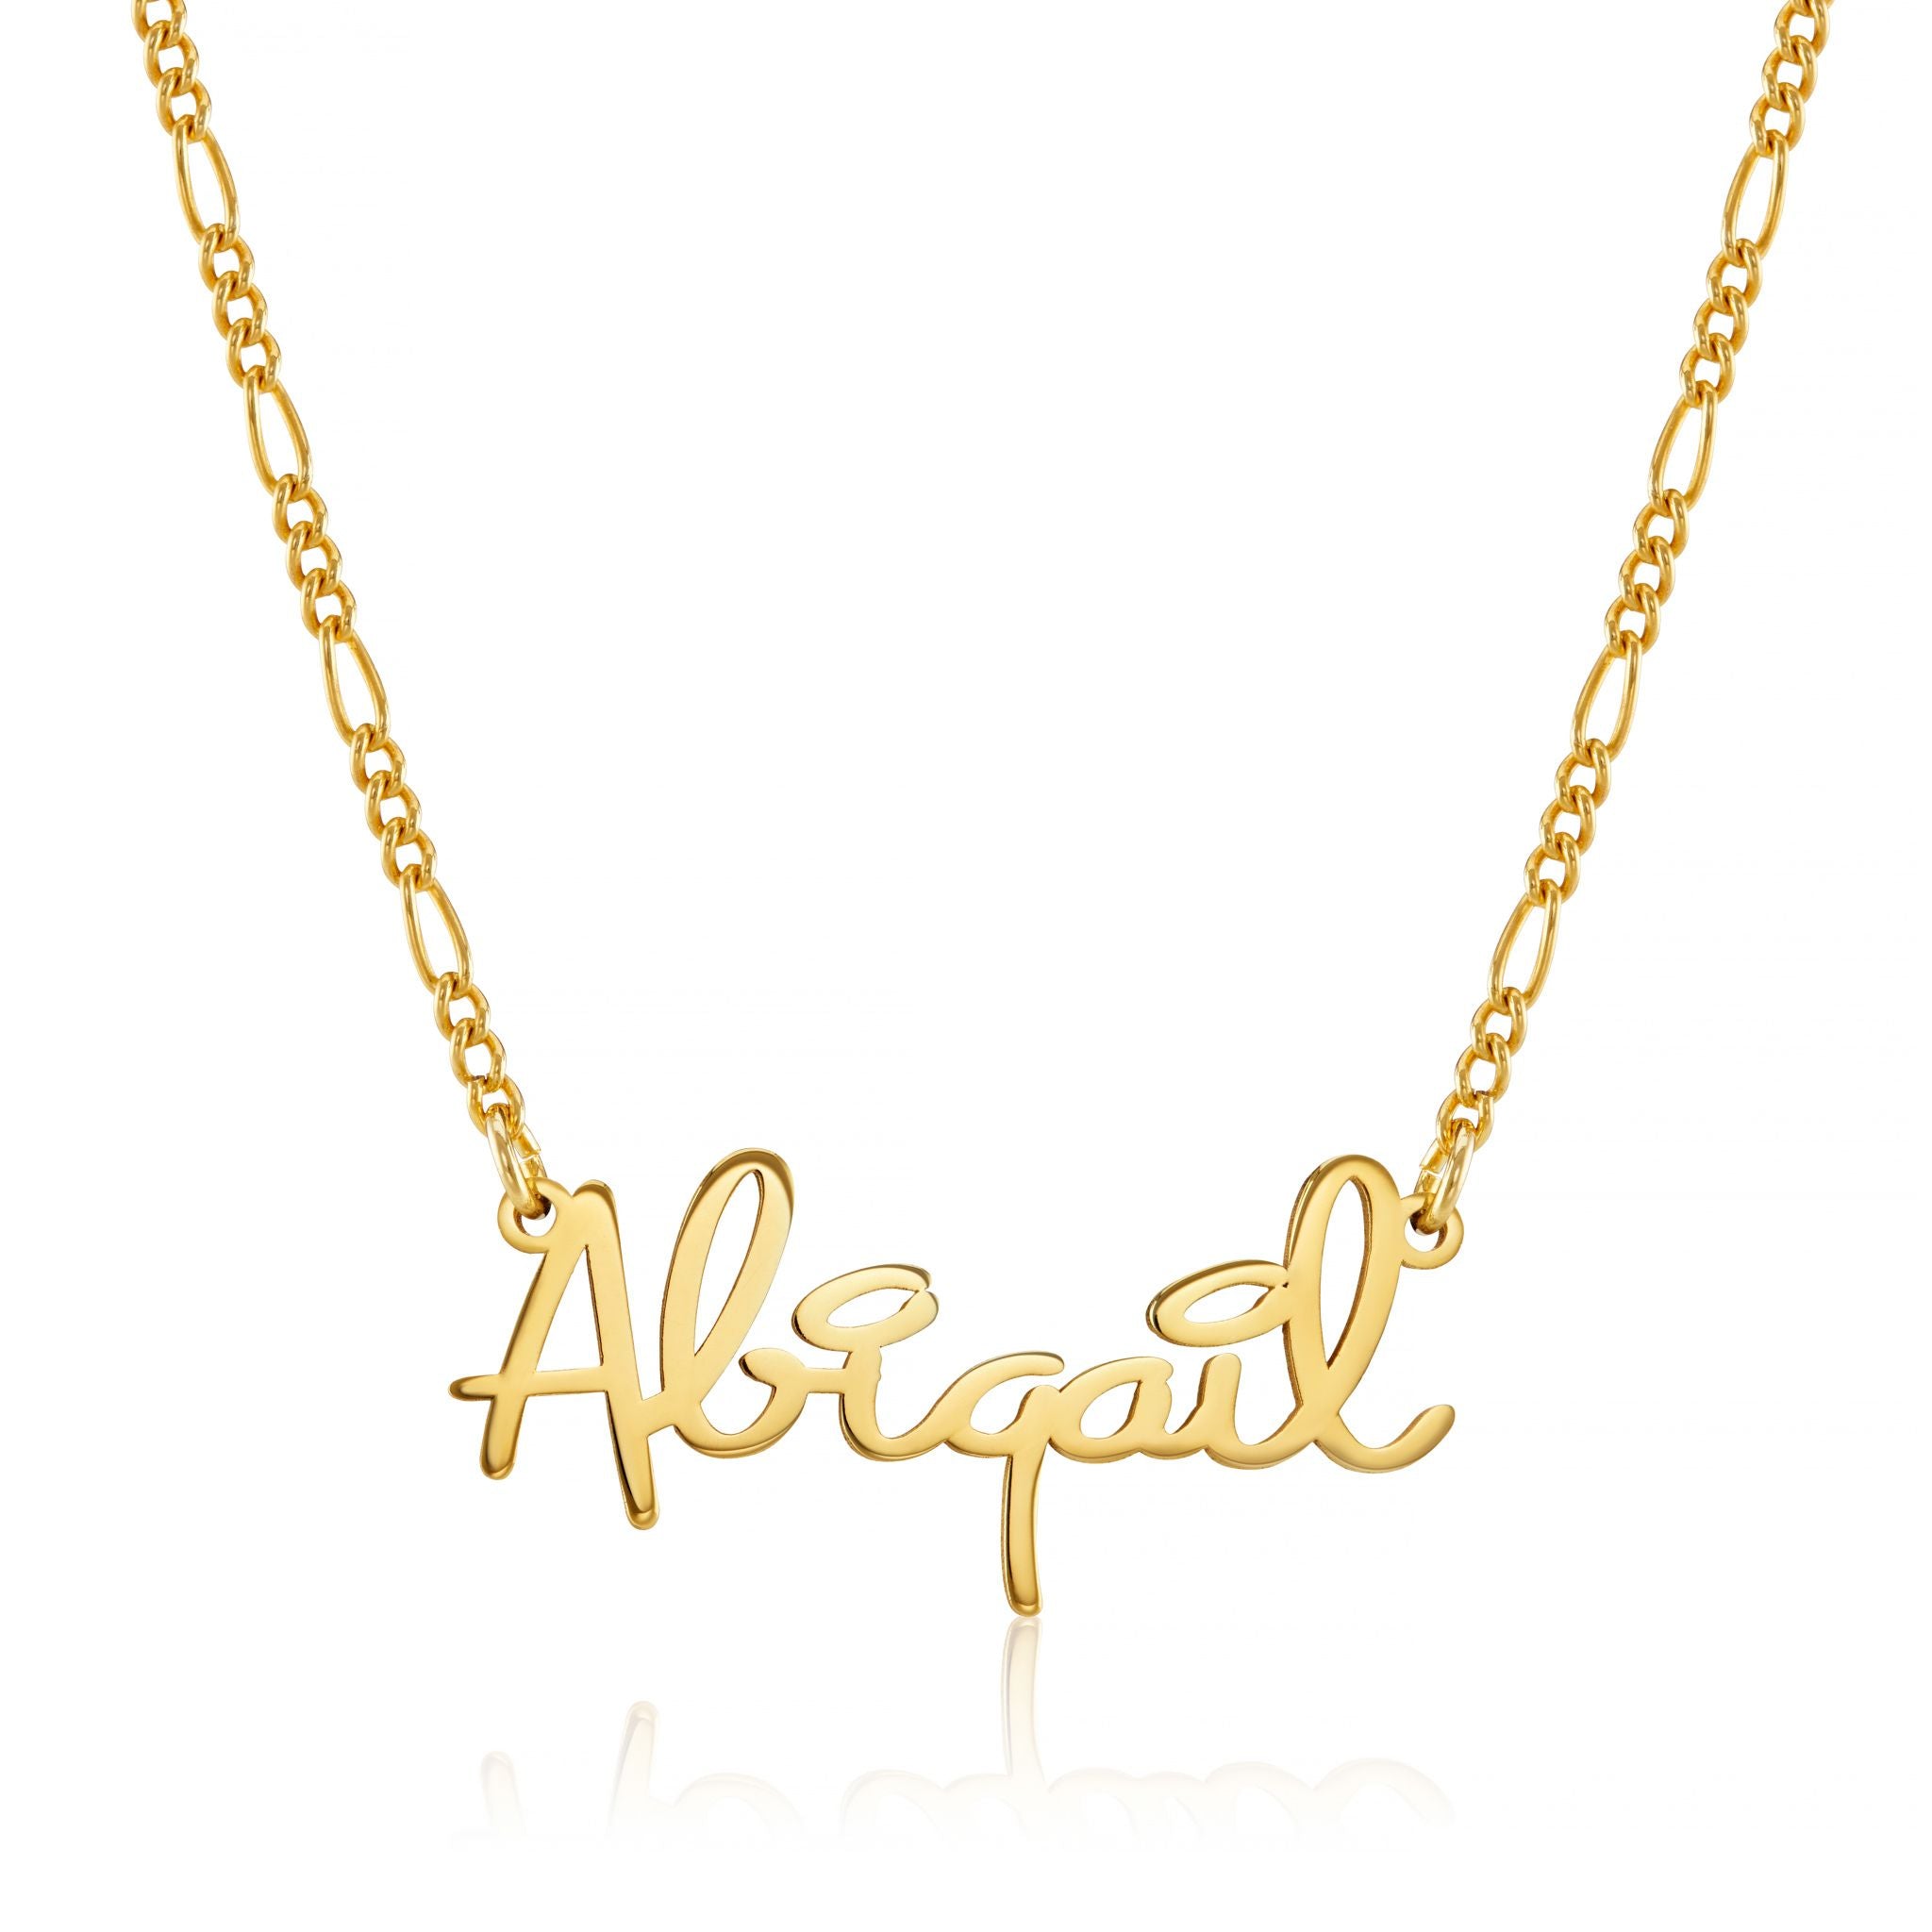 Personalised Name Necklace Pendant in Unique Font